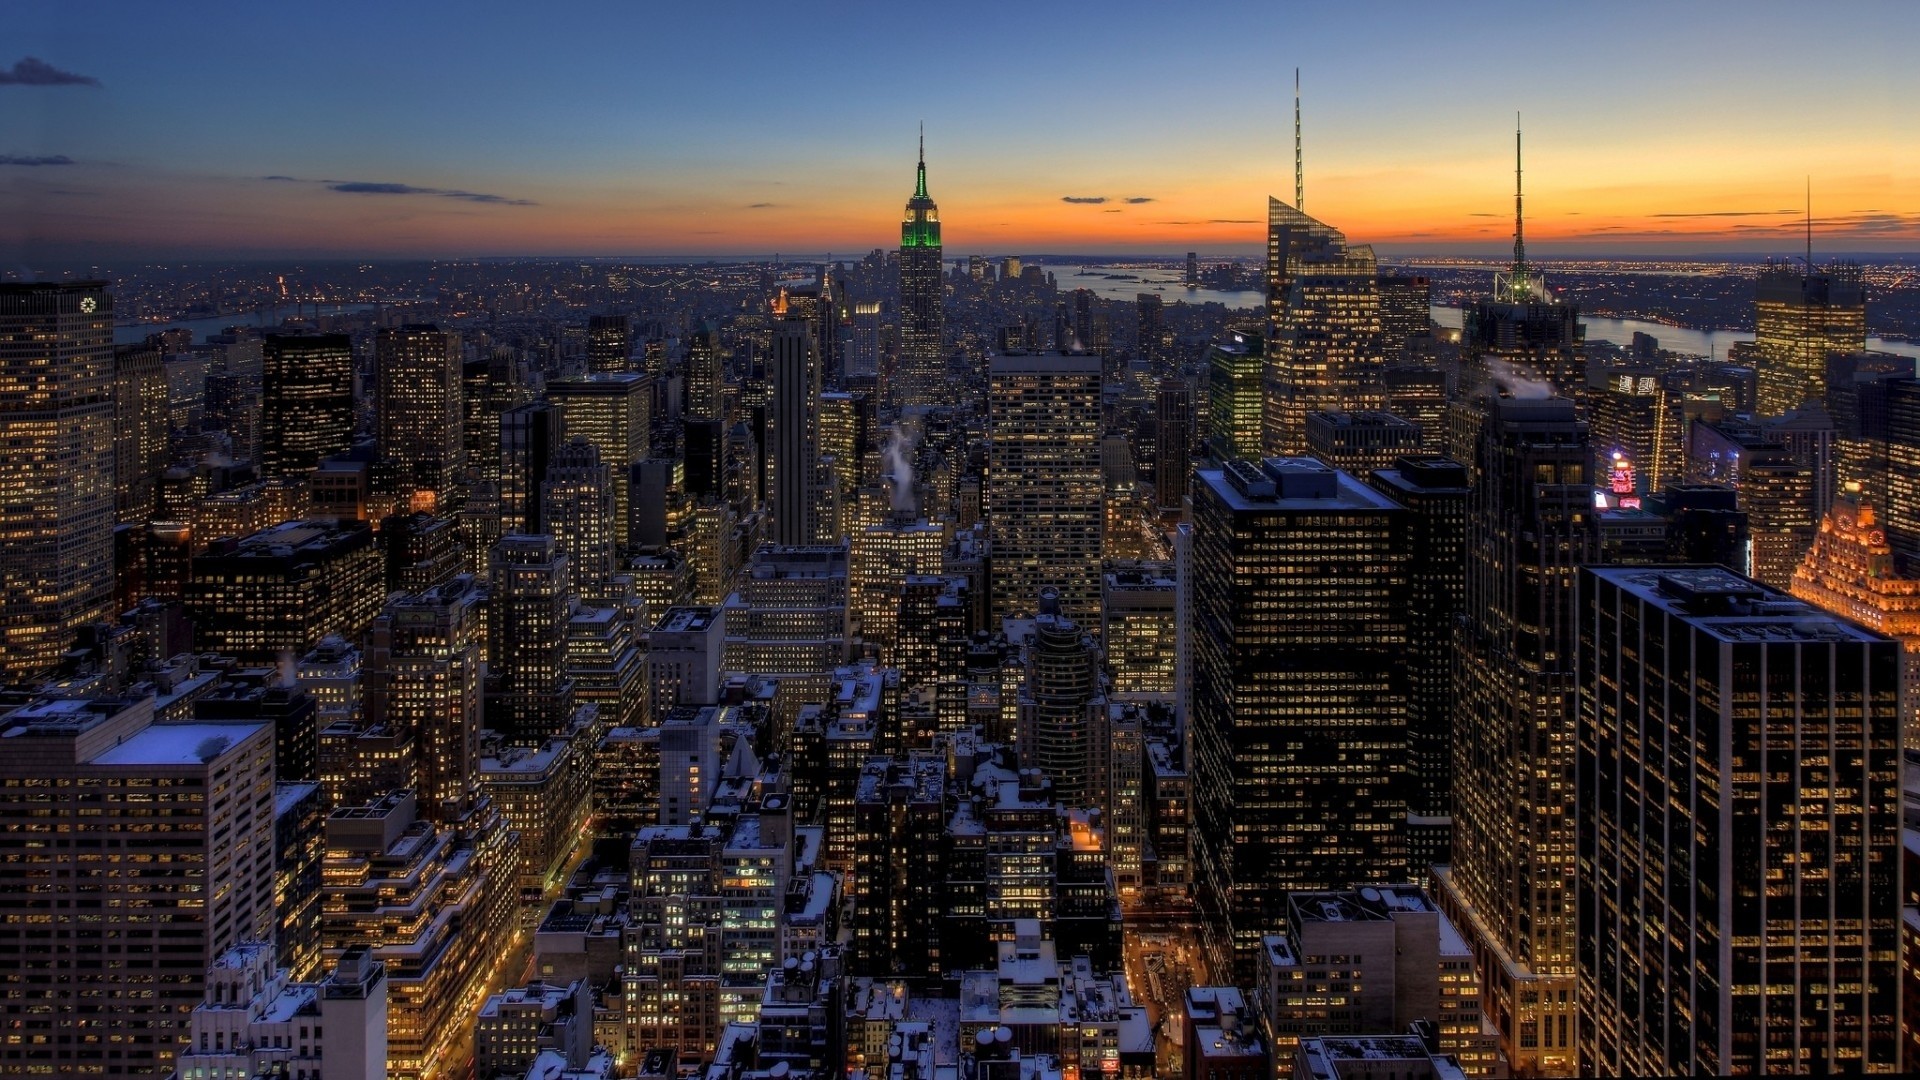 1920x1080 10 Best And Most Recent New York City Skyline Wallpaper Hd for Desktop  Computer with FULL HD 1080p (1920 Ã 1080) FREE DOWNLOAD